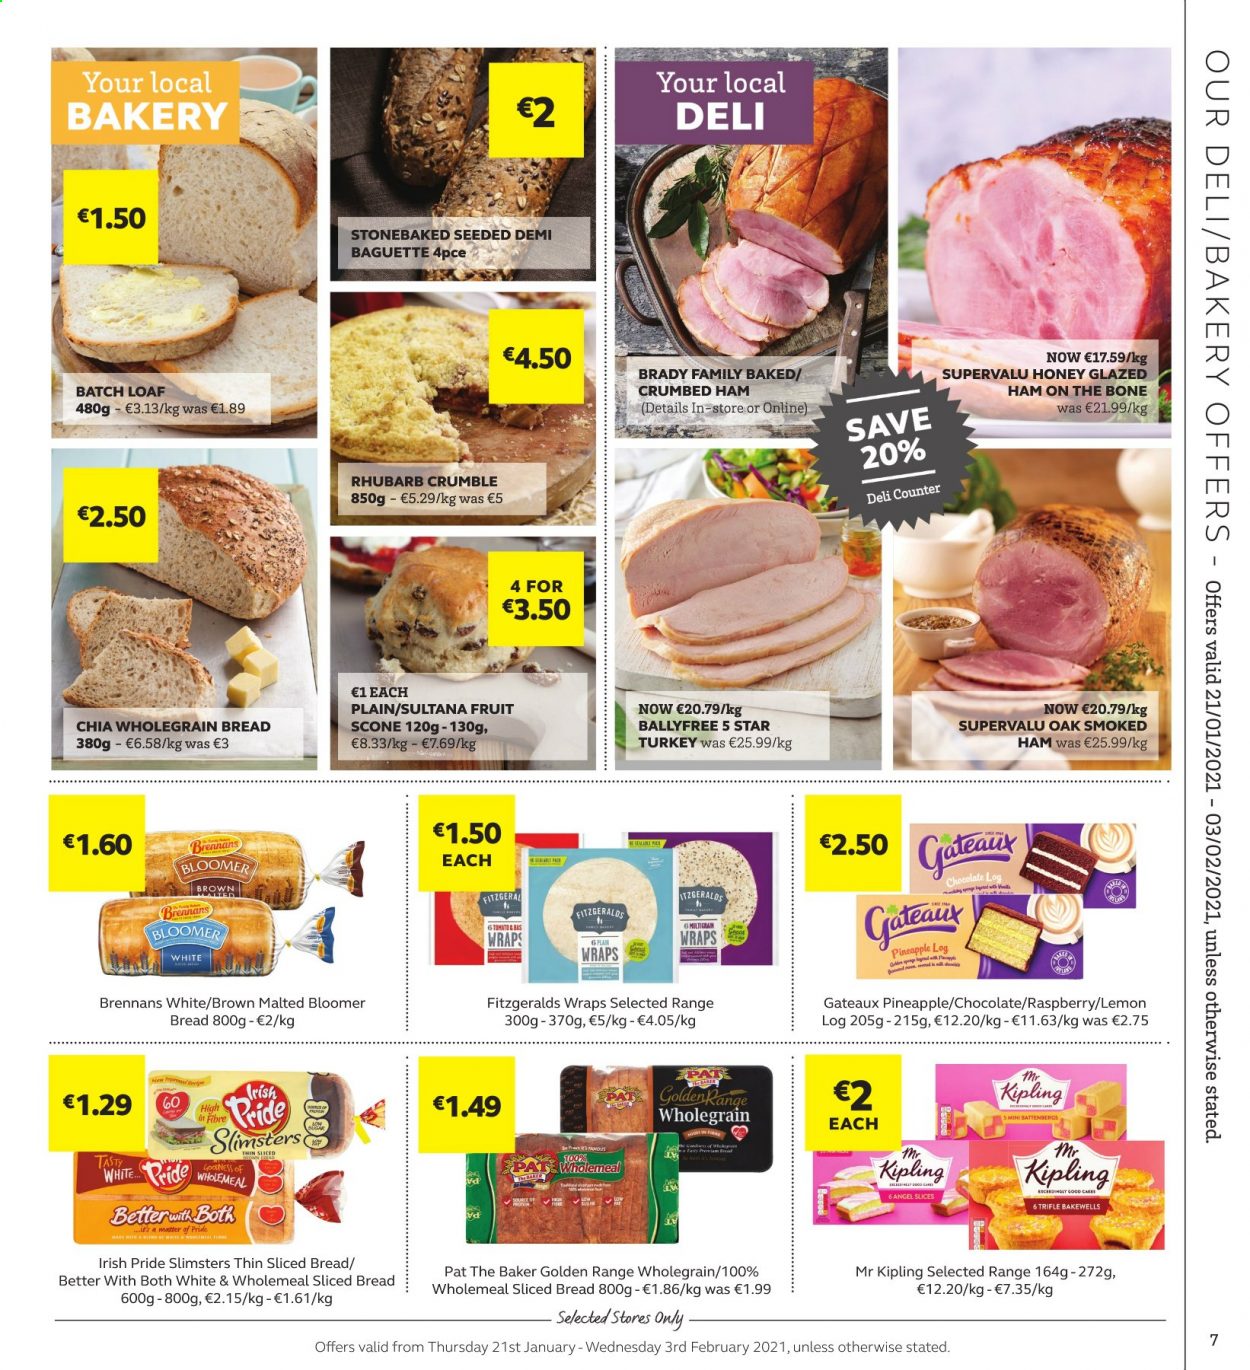 thumbnail - SuperValu offer  - 21.01.2021 - 03.02.2021 - Sales products - baguette, bread, cake, rhubarb, pineapple, ham, chocolate. Page 7.